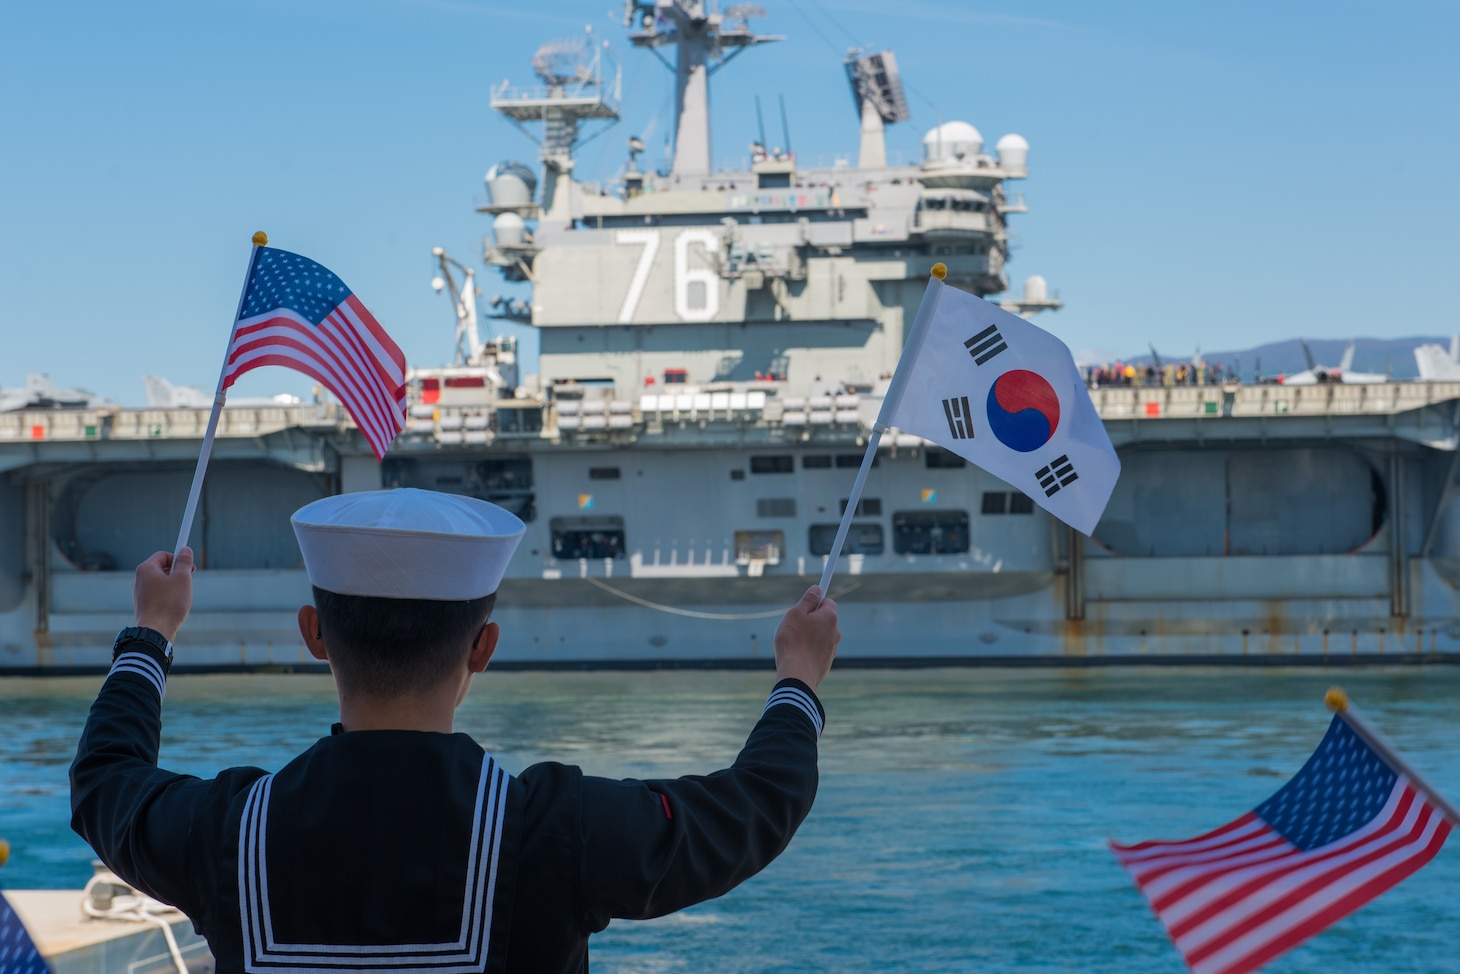 EJU ISLAND, Republic of Korea, (Oct. 12, 2018) The nimitz-class nuclear-powered aircraft carrier USS Ronald Reagan (CVN 76) pulls in to port at the Republic of Korea (ROK) Navy base in Jeju. Ronald Reagan is forward-deployed to the U.S. 7th Fleet area of operations in support of security and stability in the Indo-Pacific region.